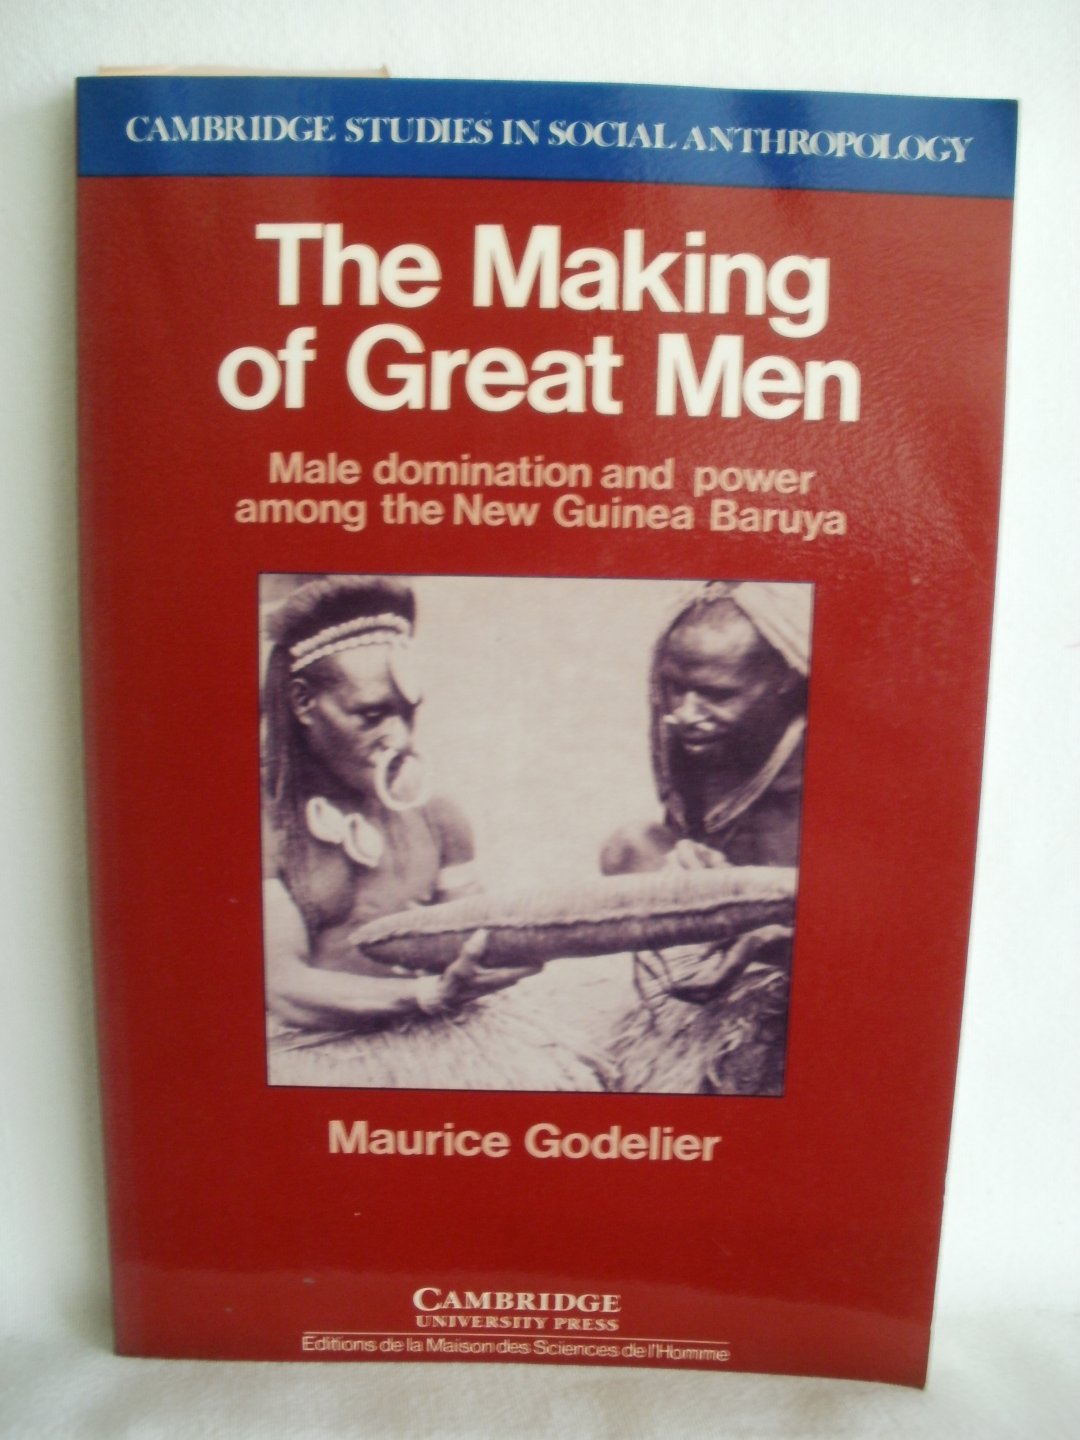 Godelier, Maurice - The Making of Great Men. Male domination and power among the New Guinea Baruya. Cambridge Studies in Social Anthropology no. 56.